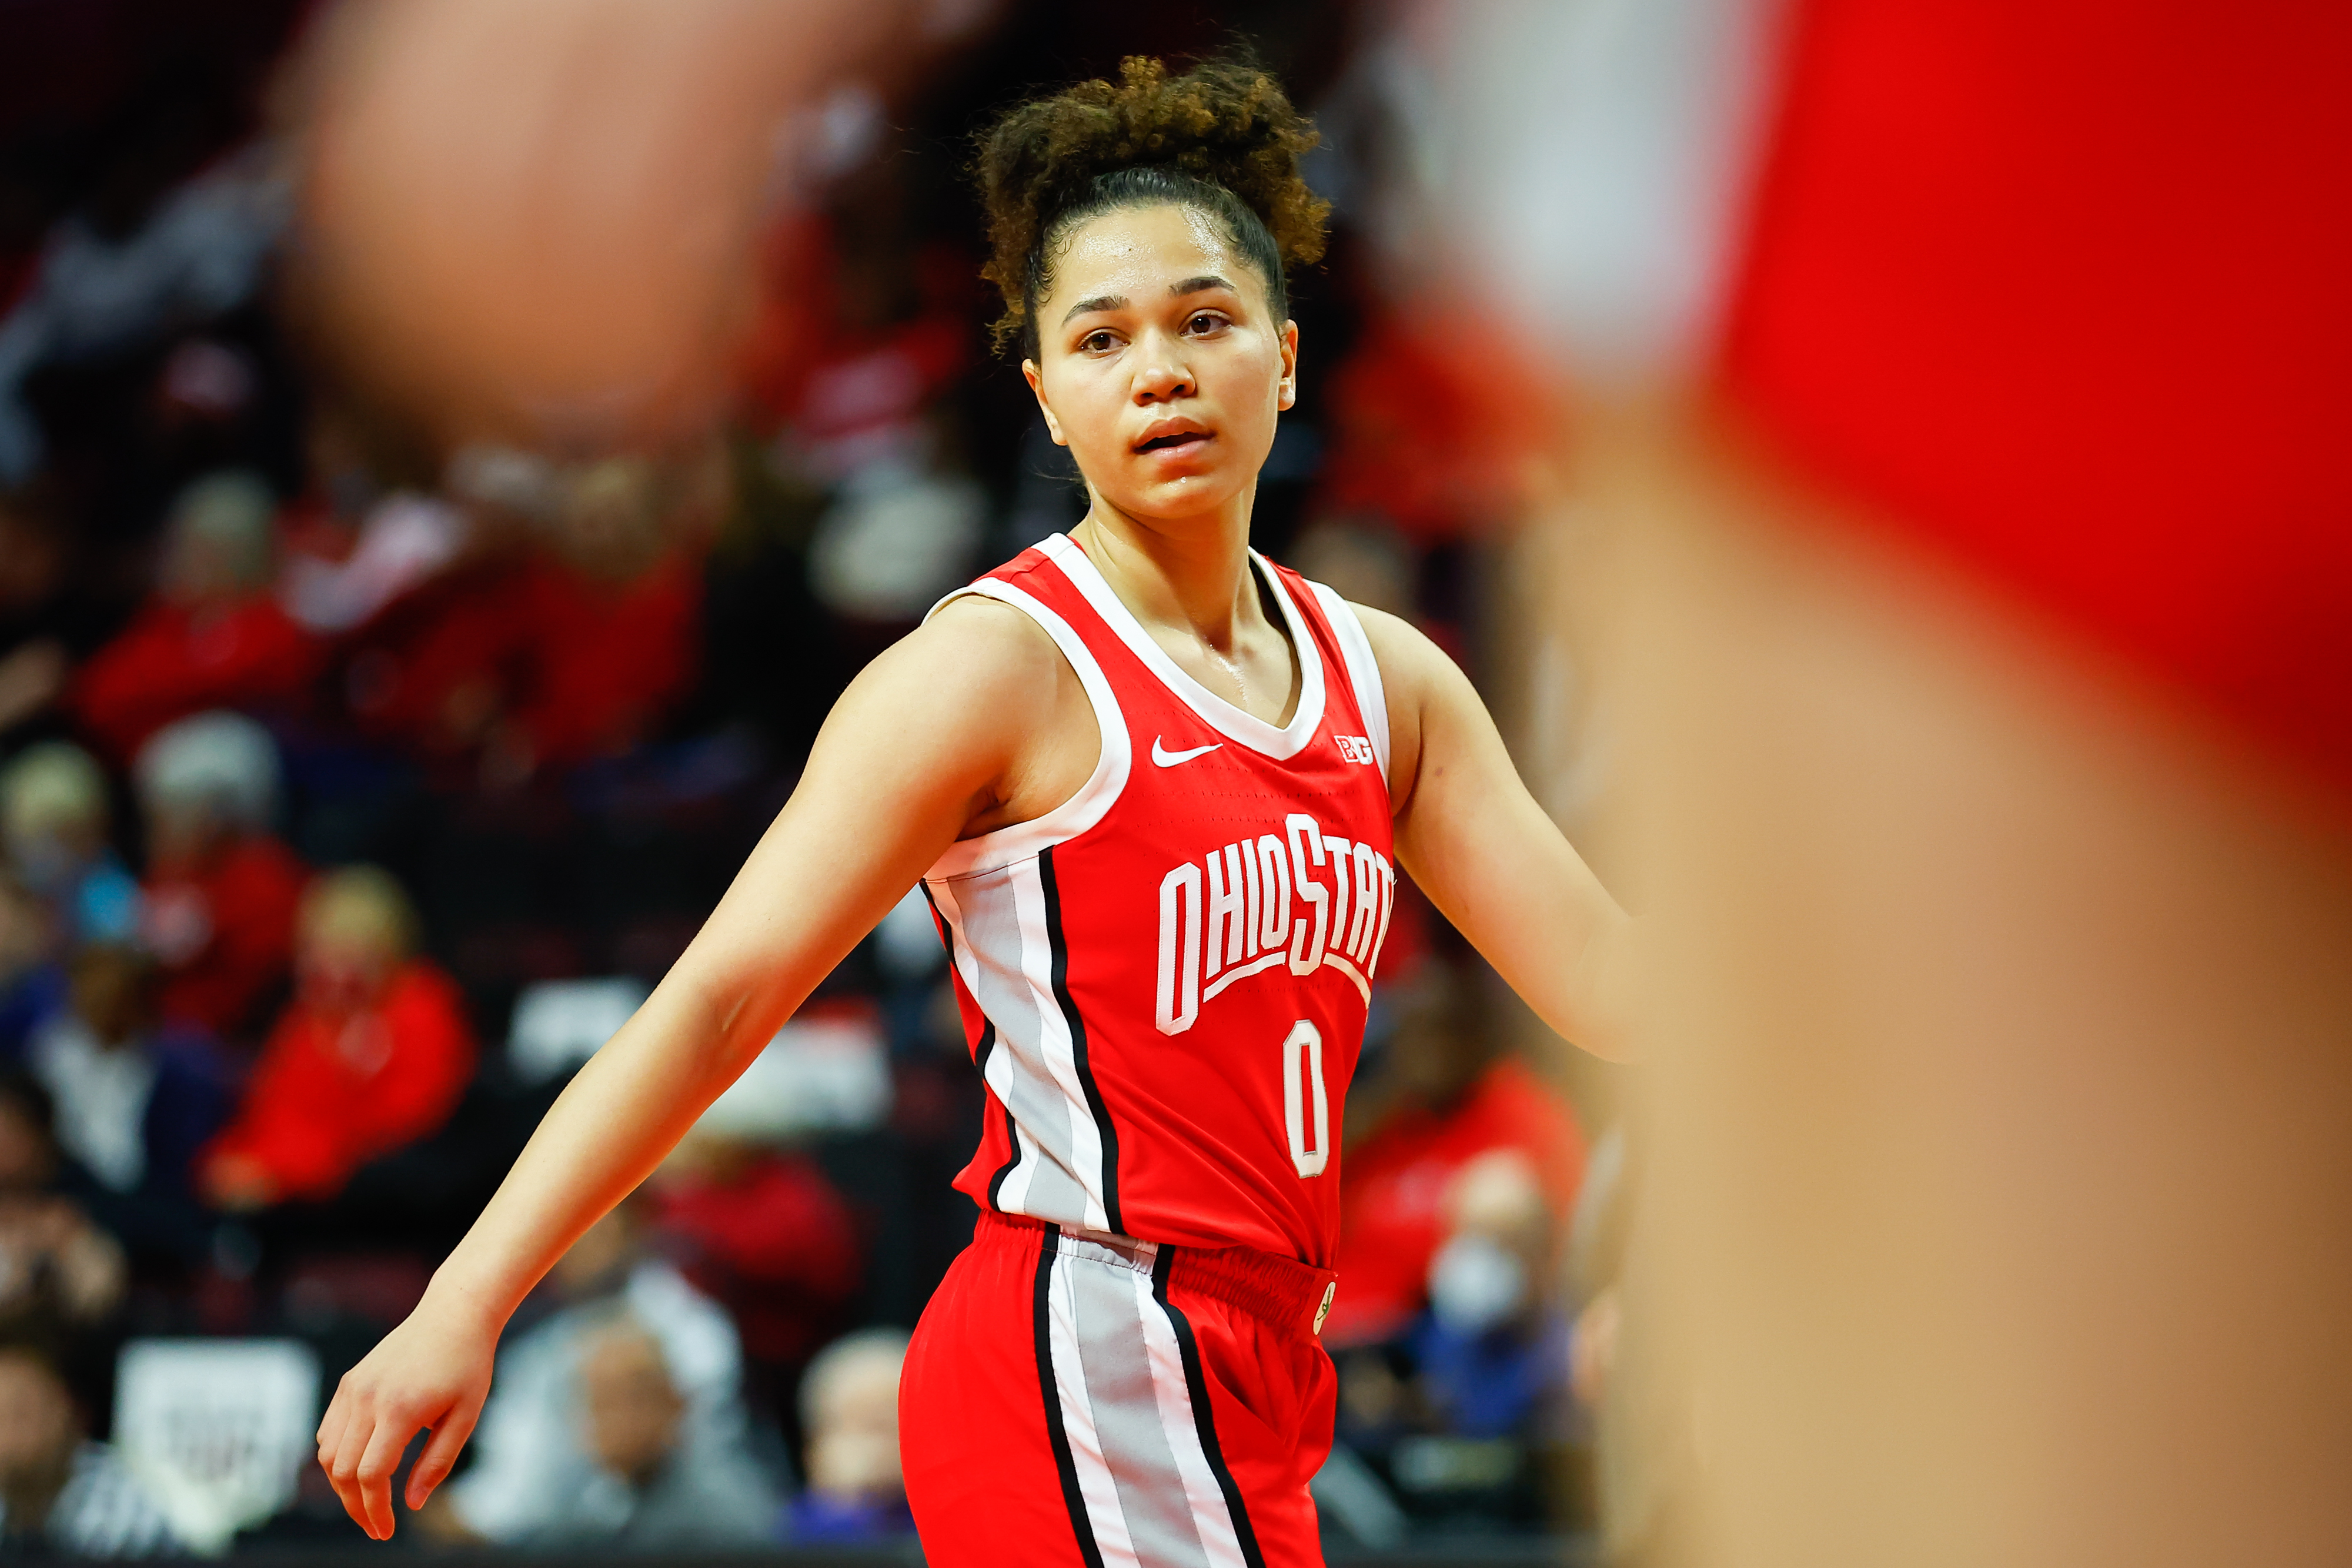 COLLEGE BASKETBALL: DEC 04 Women’s Ohio State at Rutgers